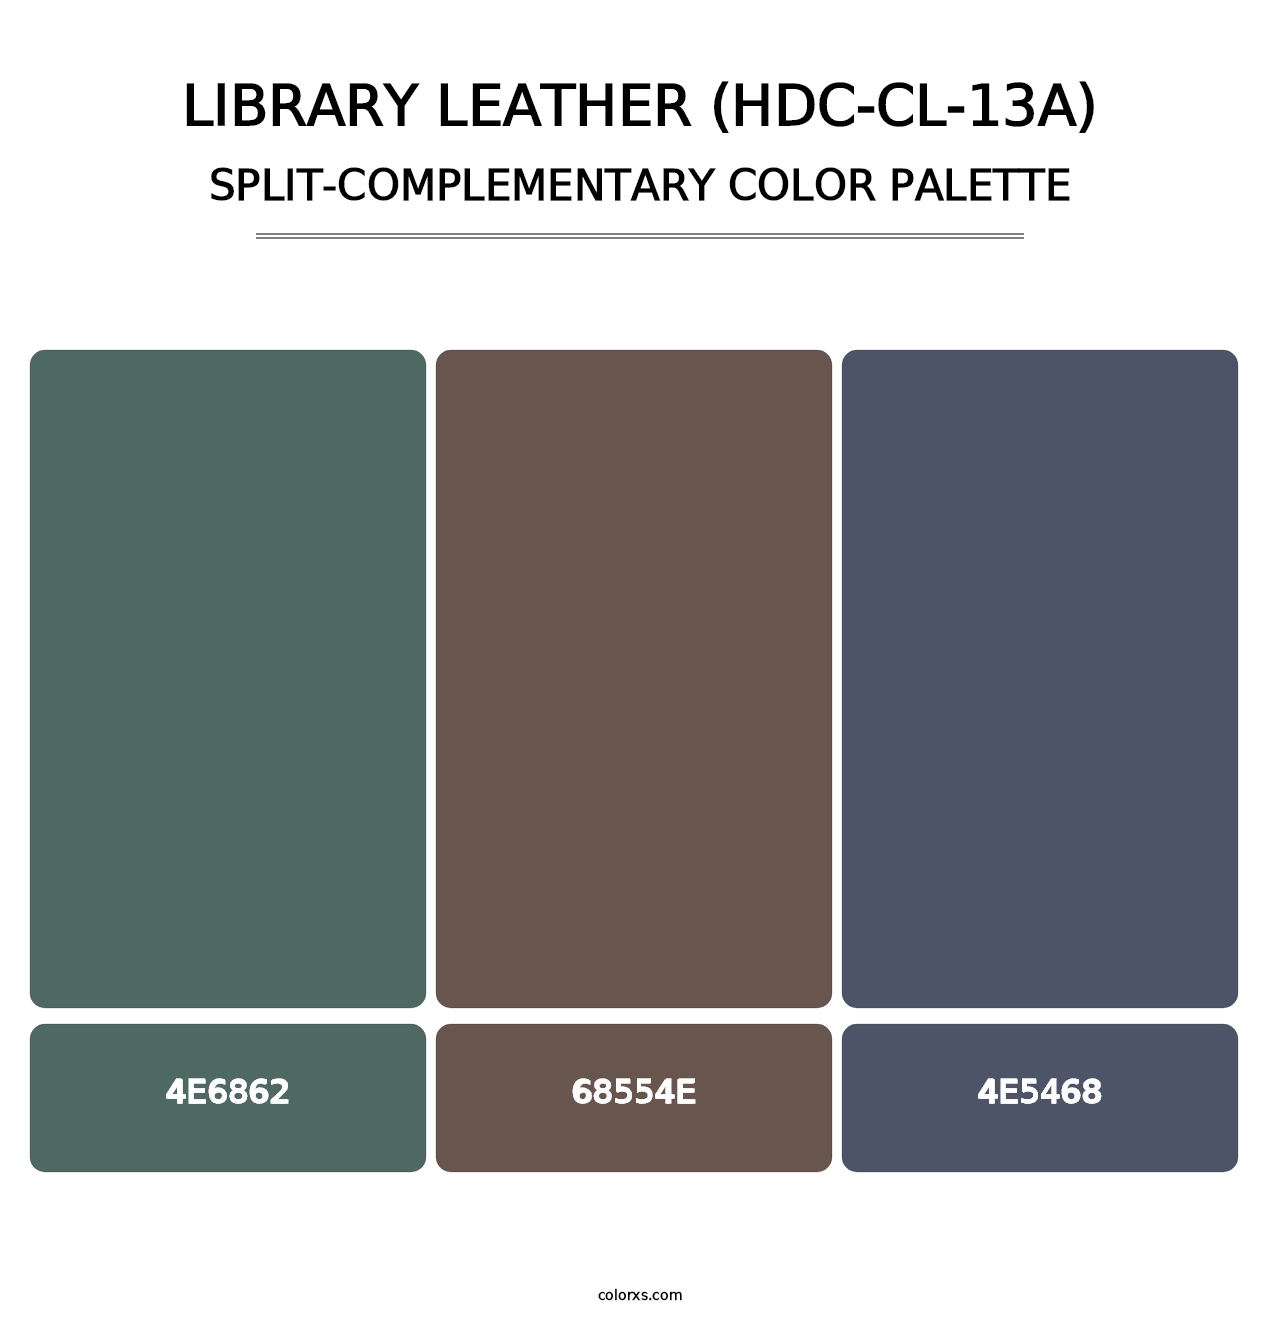 Library Leather (HDC-CL-13A) - Split-Complementary Color Palette